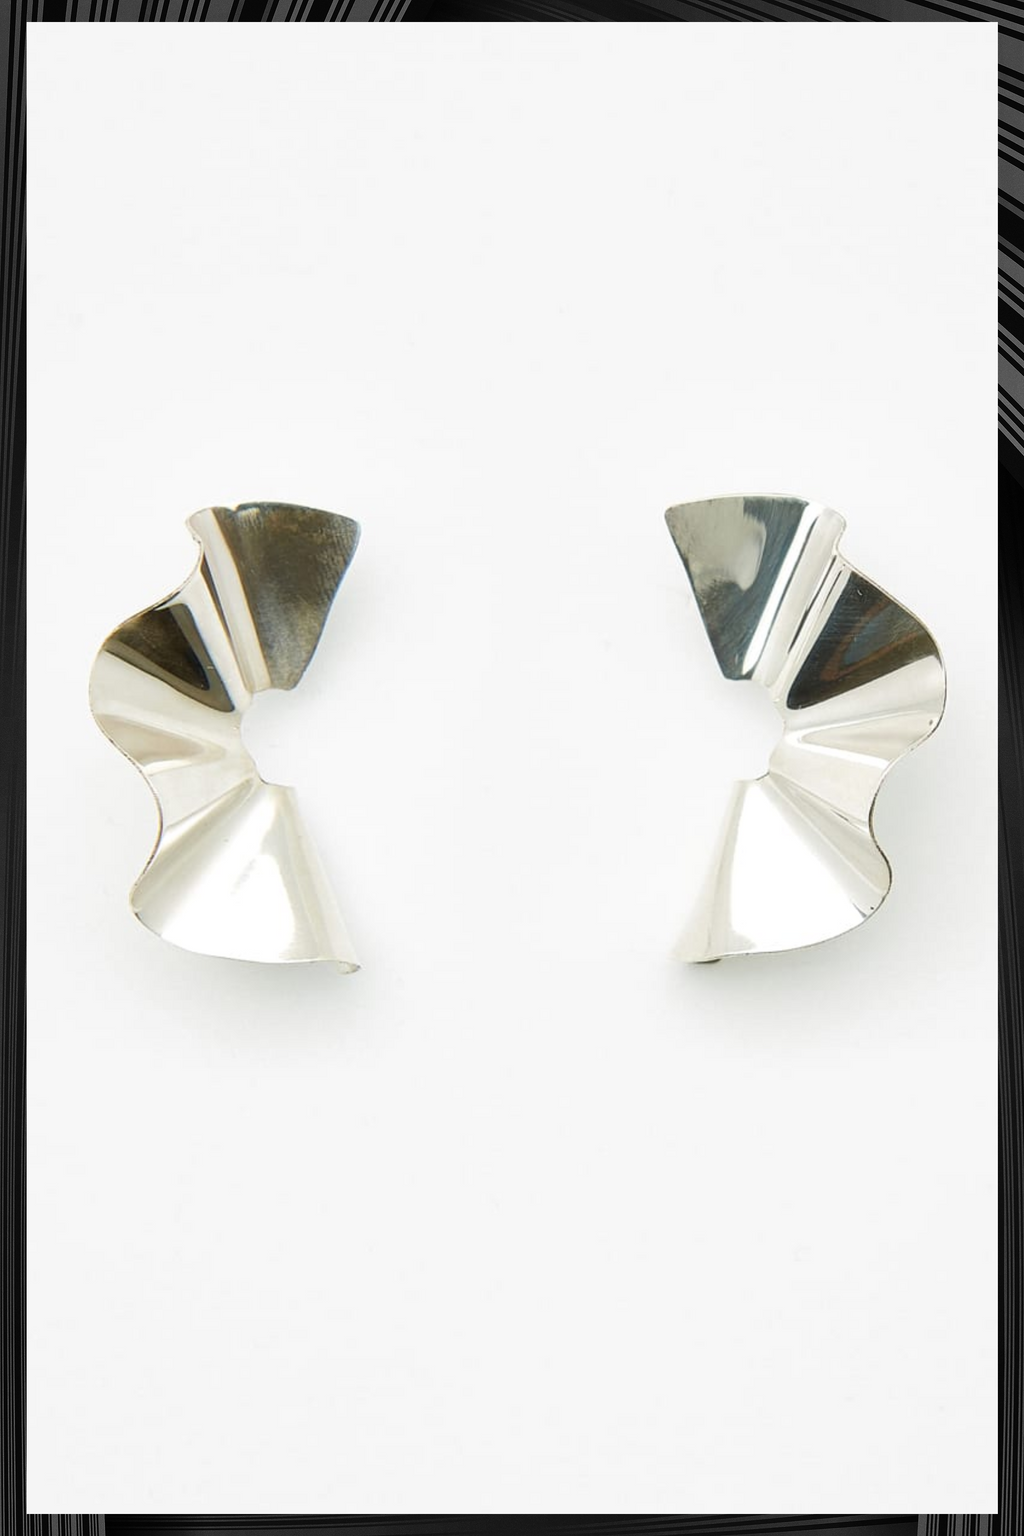 Silver Tra Tra Midi Earrings | Free Delivery - Quick Shipping